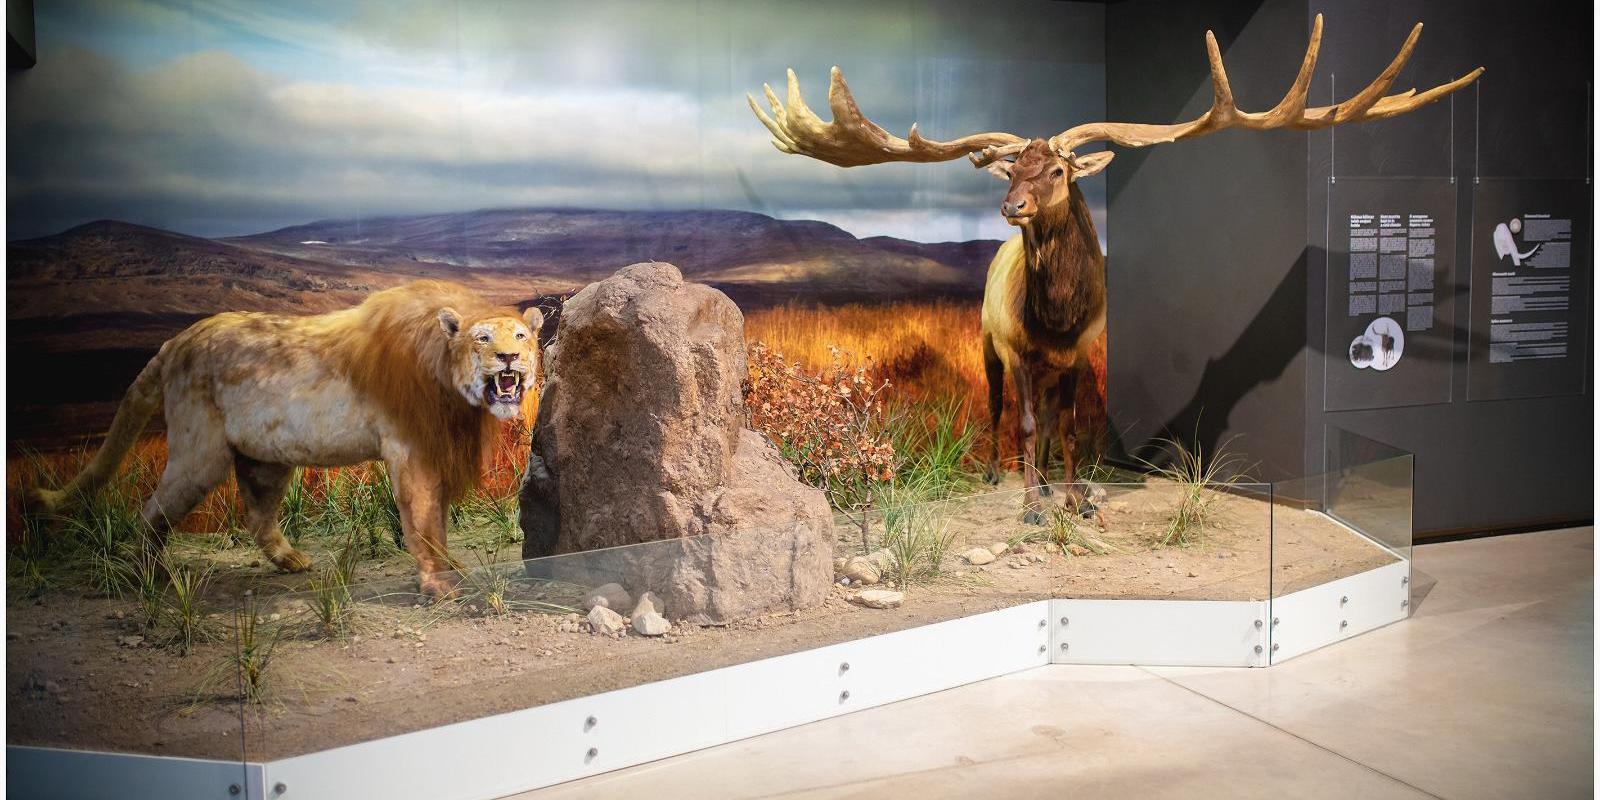 Exhibition at the Ice Age Centre